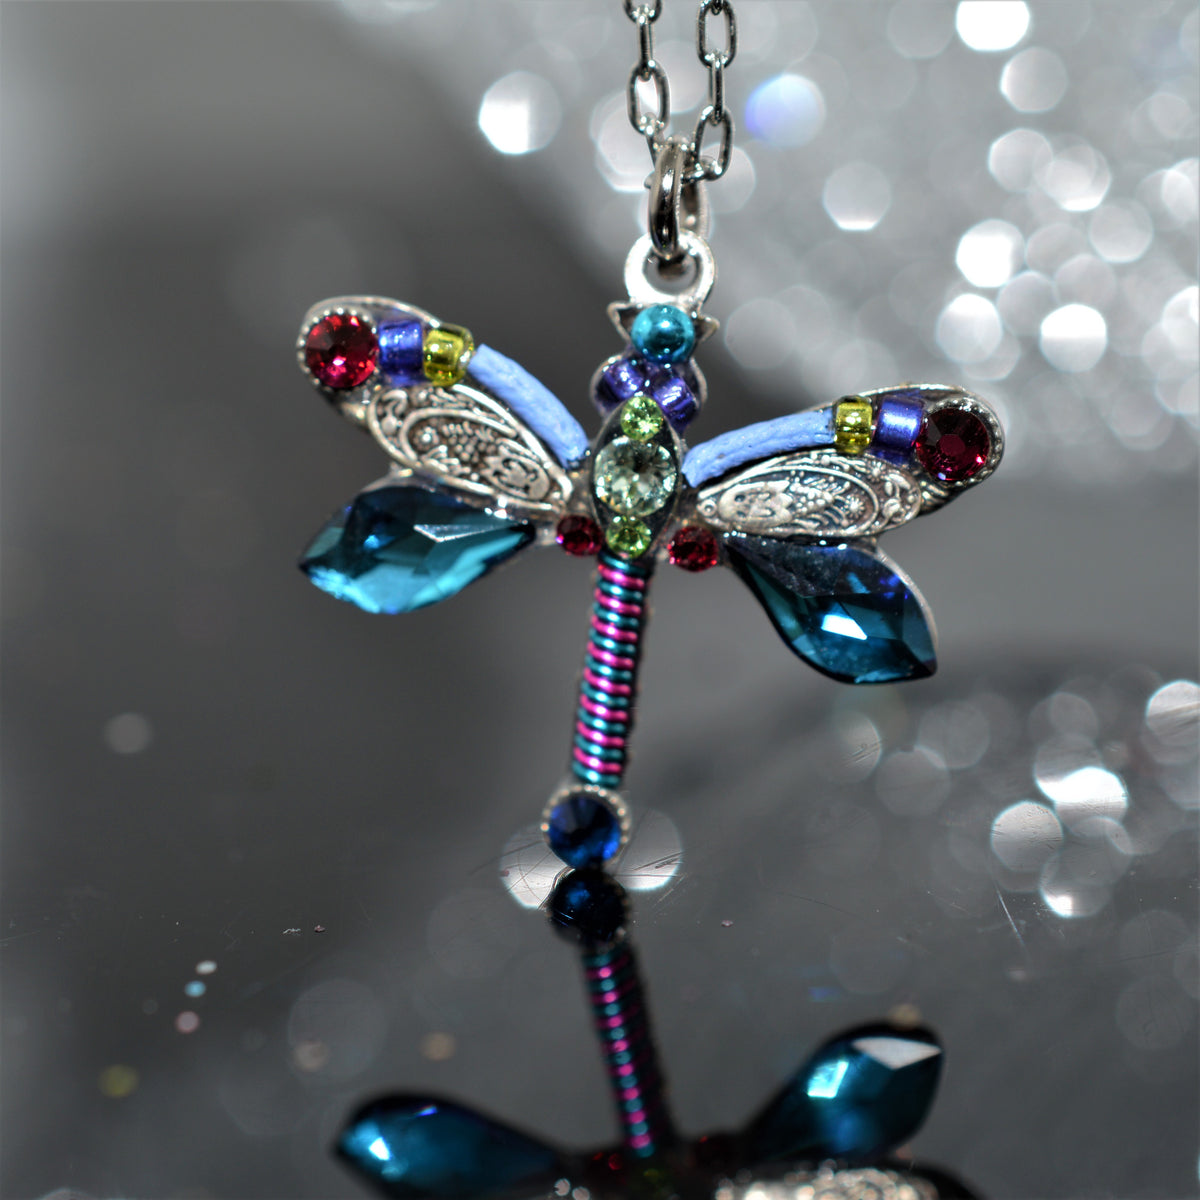 Antique Silver Plated Dragonfly Pendant With Bermuda Blue Colored Crystals by Firefly